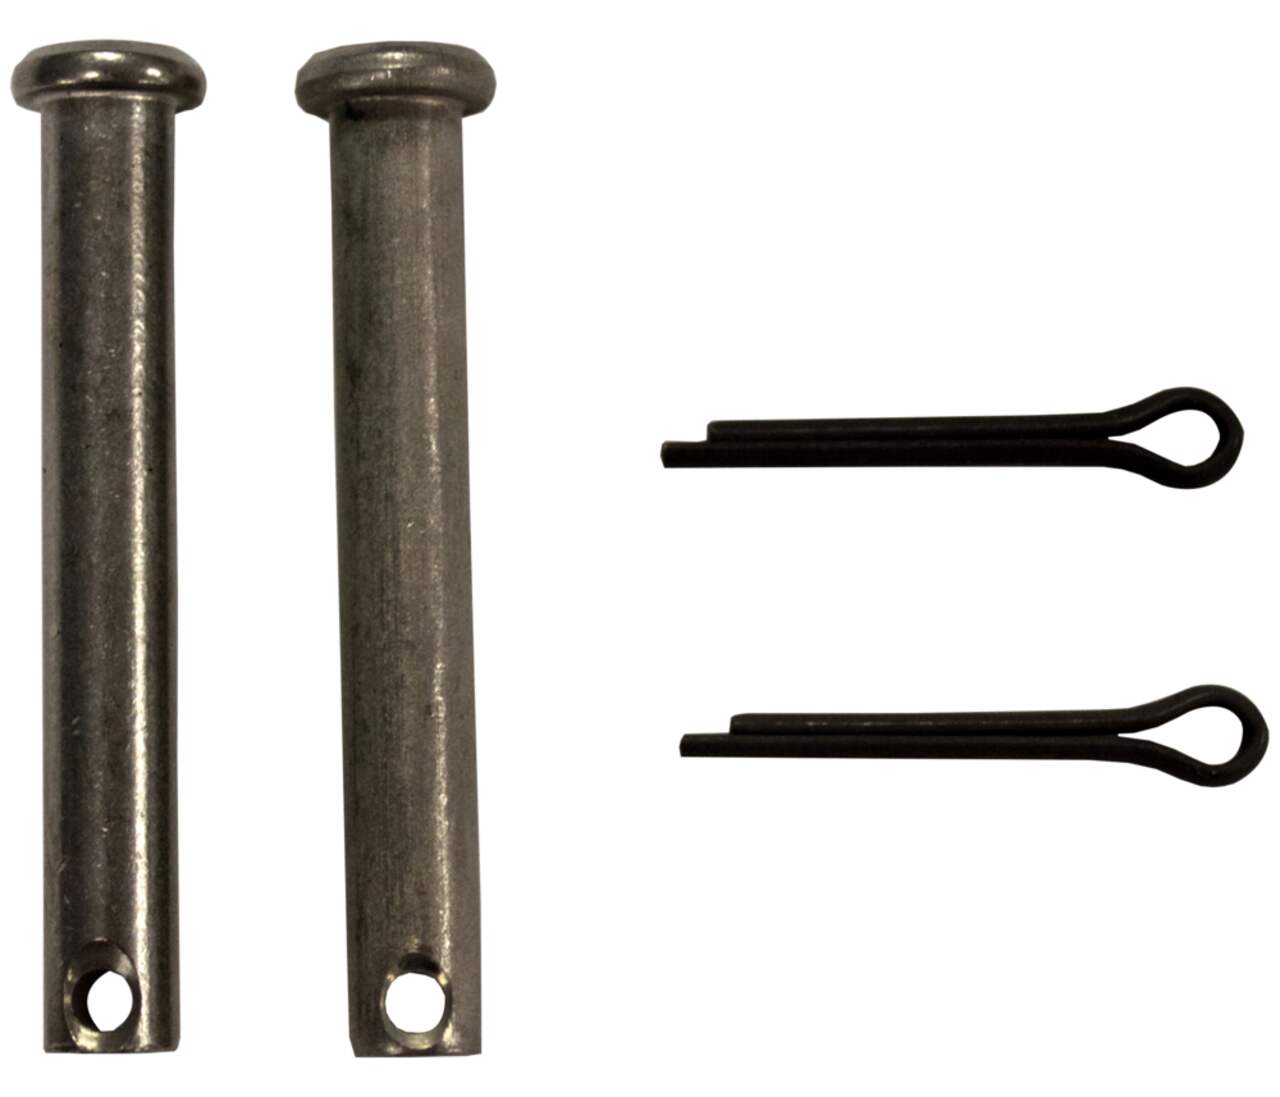 Certified Snowblower RePlacement Shear Pins, 2 shear bolt, 2 lock nuts